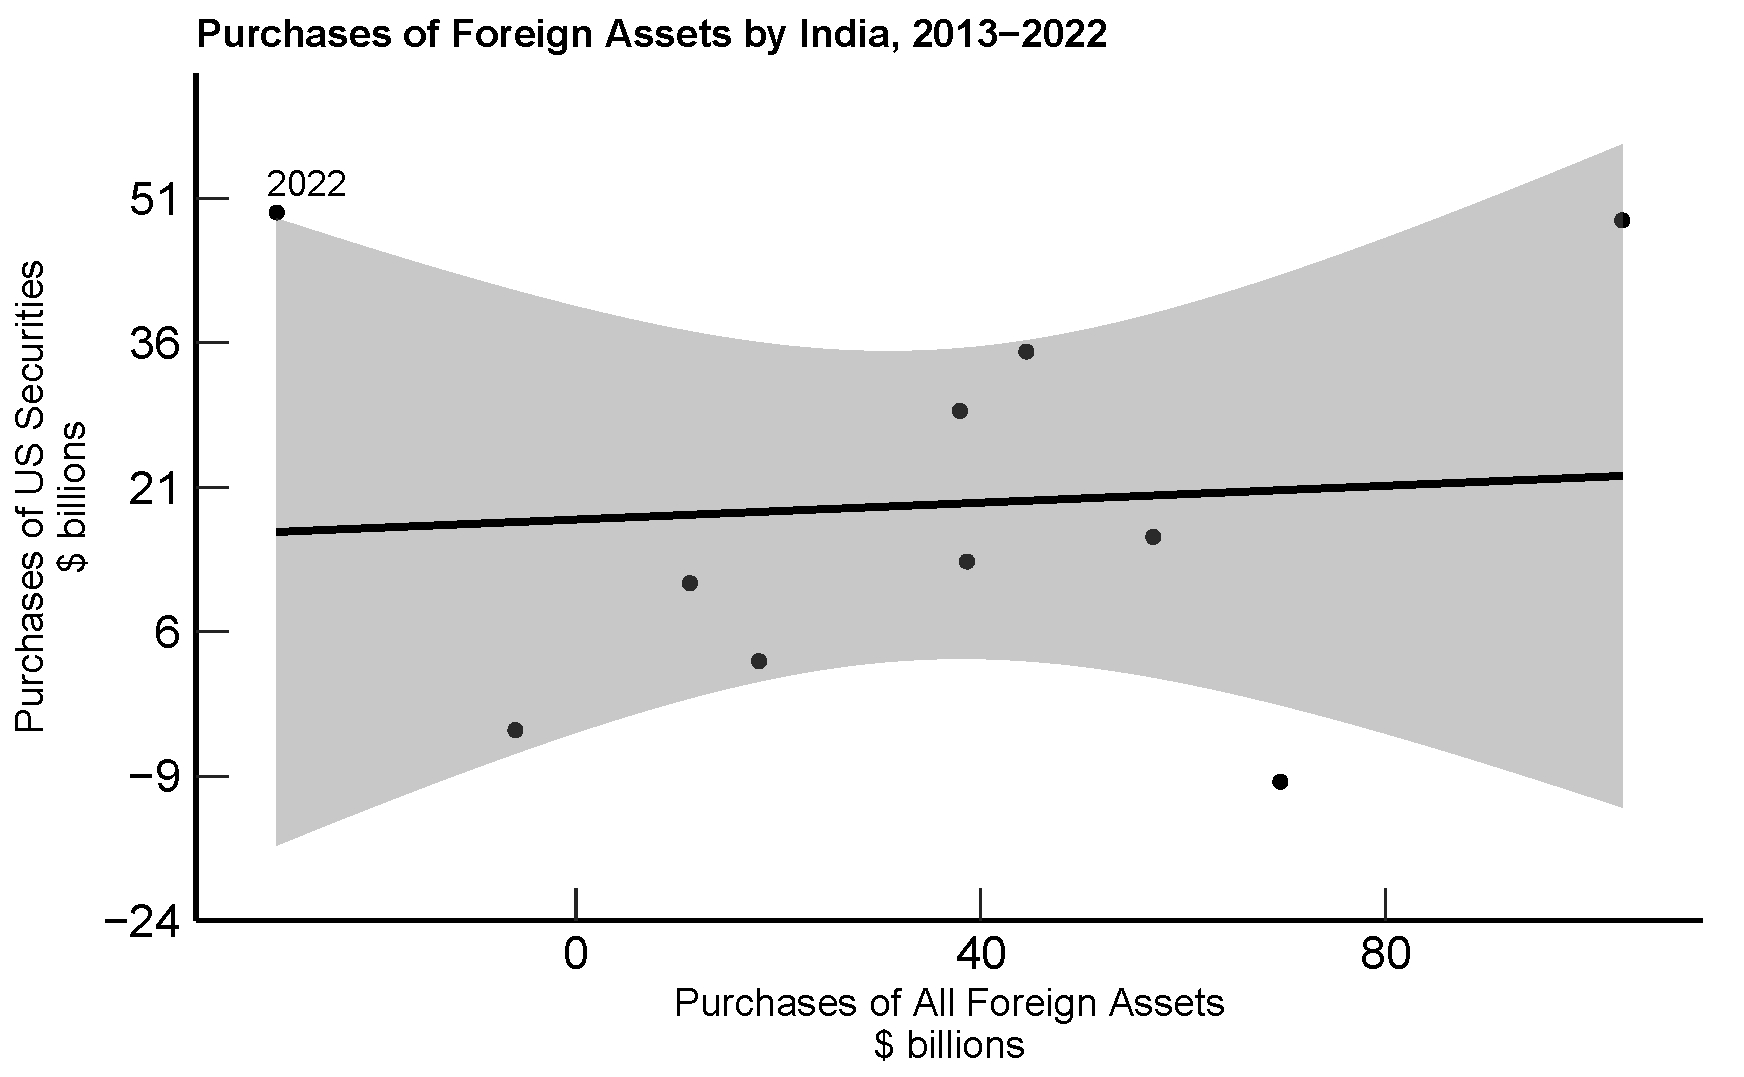 Figure 4. Purchases of Foreign Assets by India, 2013−2022. See accessible link for data.